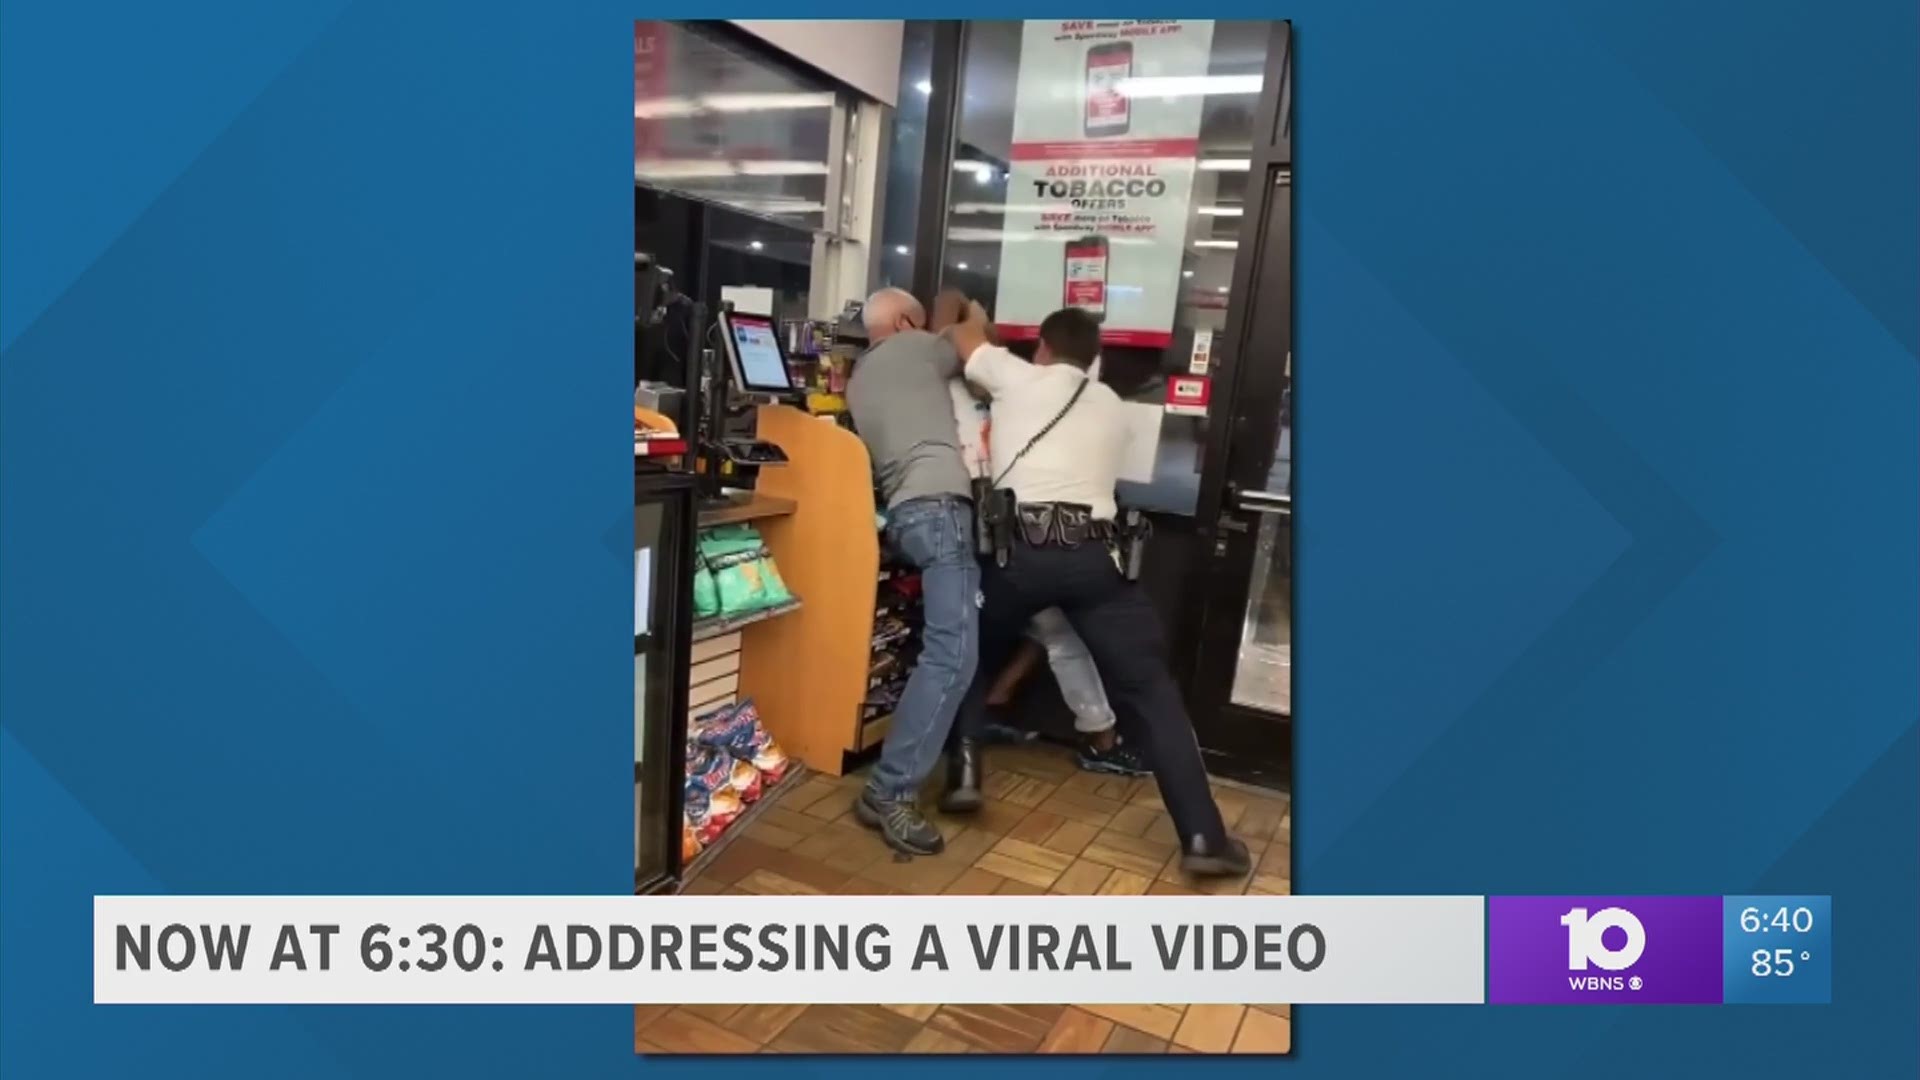 A video captured an arrest of a man being disruptive in a gas station on South High Street overnight.